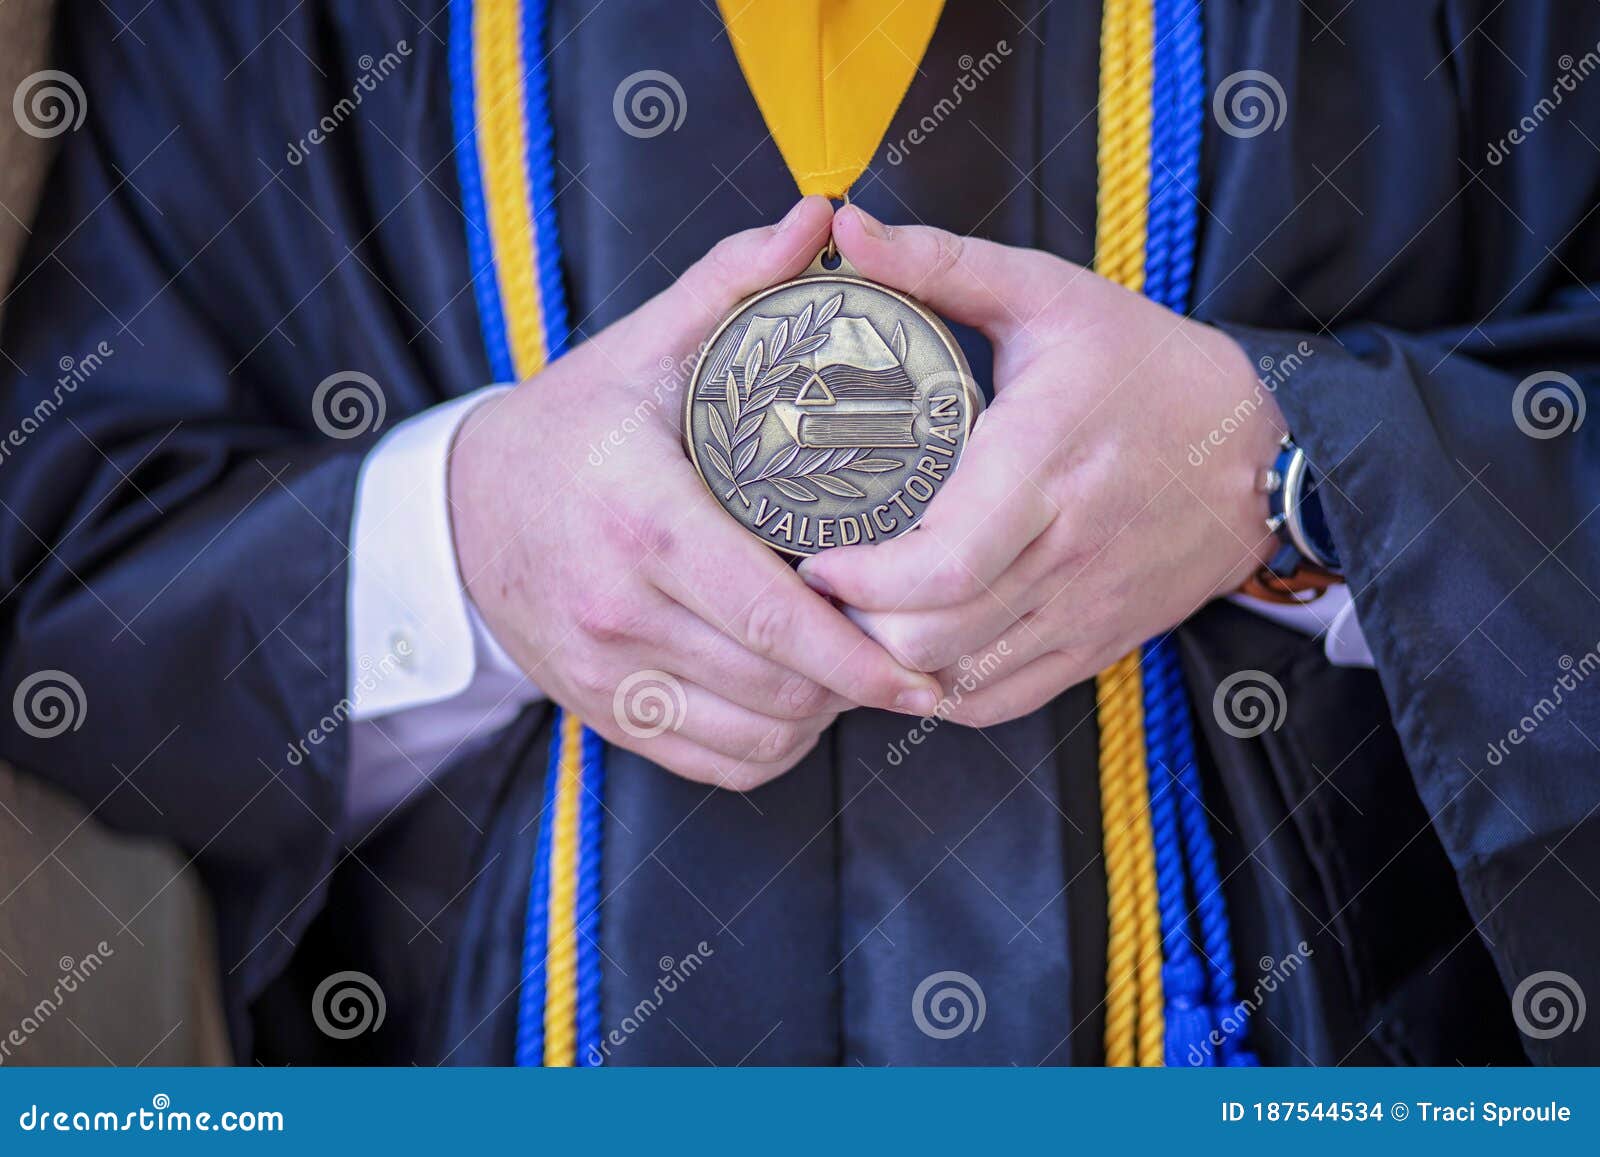 national honours and awards ceremony clipart